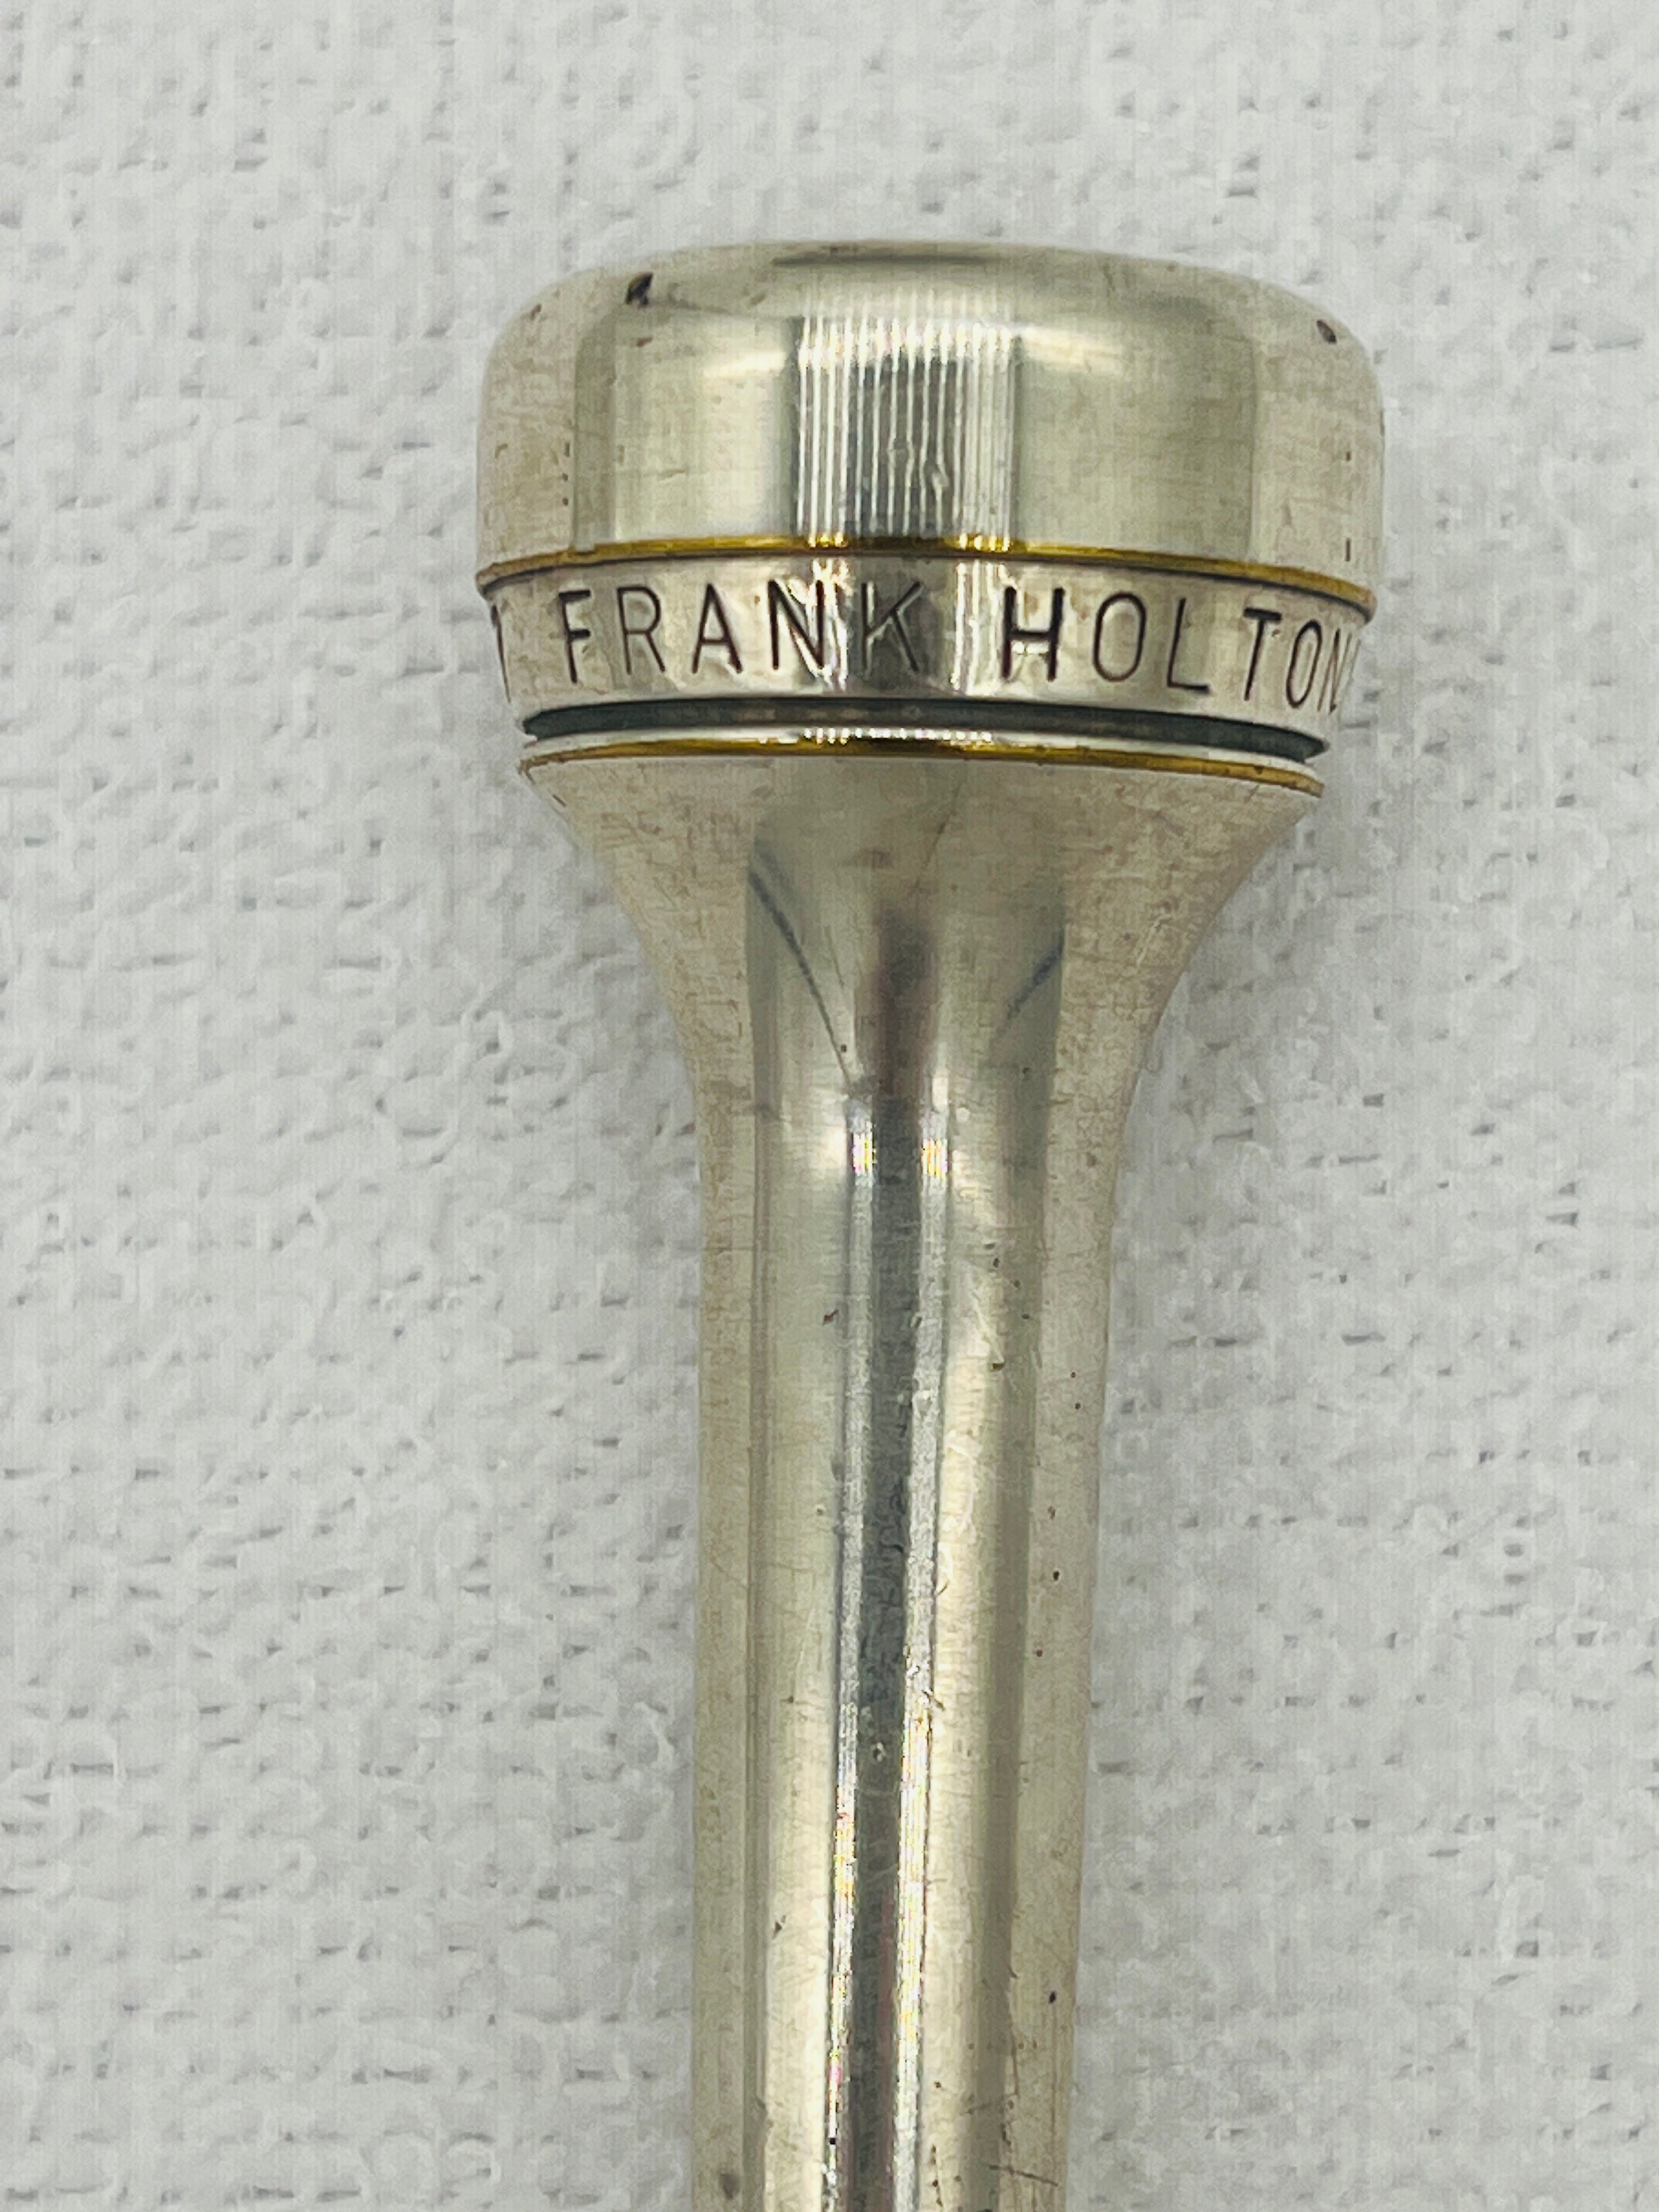 Frank Holton & Co. 67 Trumpet Mouthpiece Elkhorn, Wis. USA USED